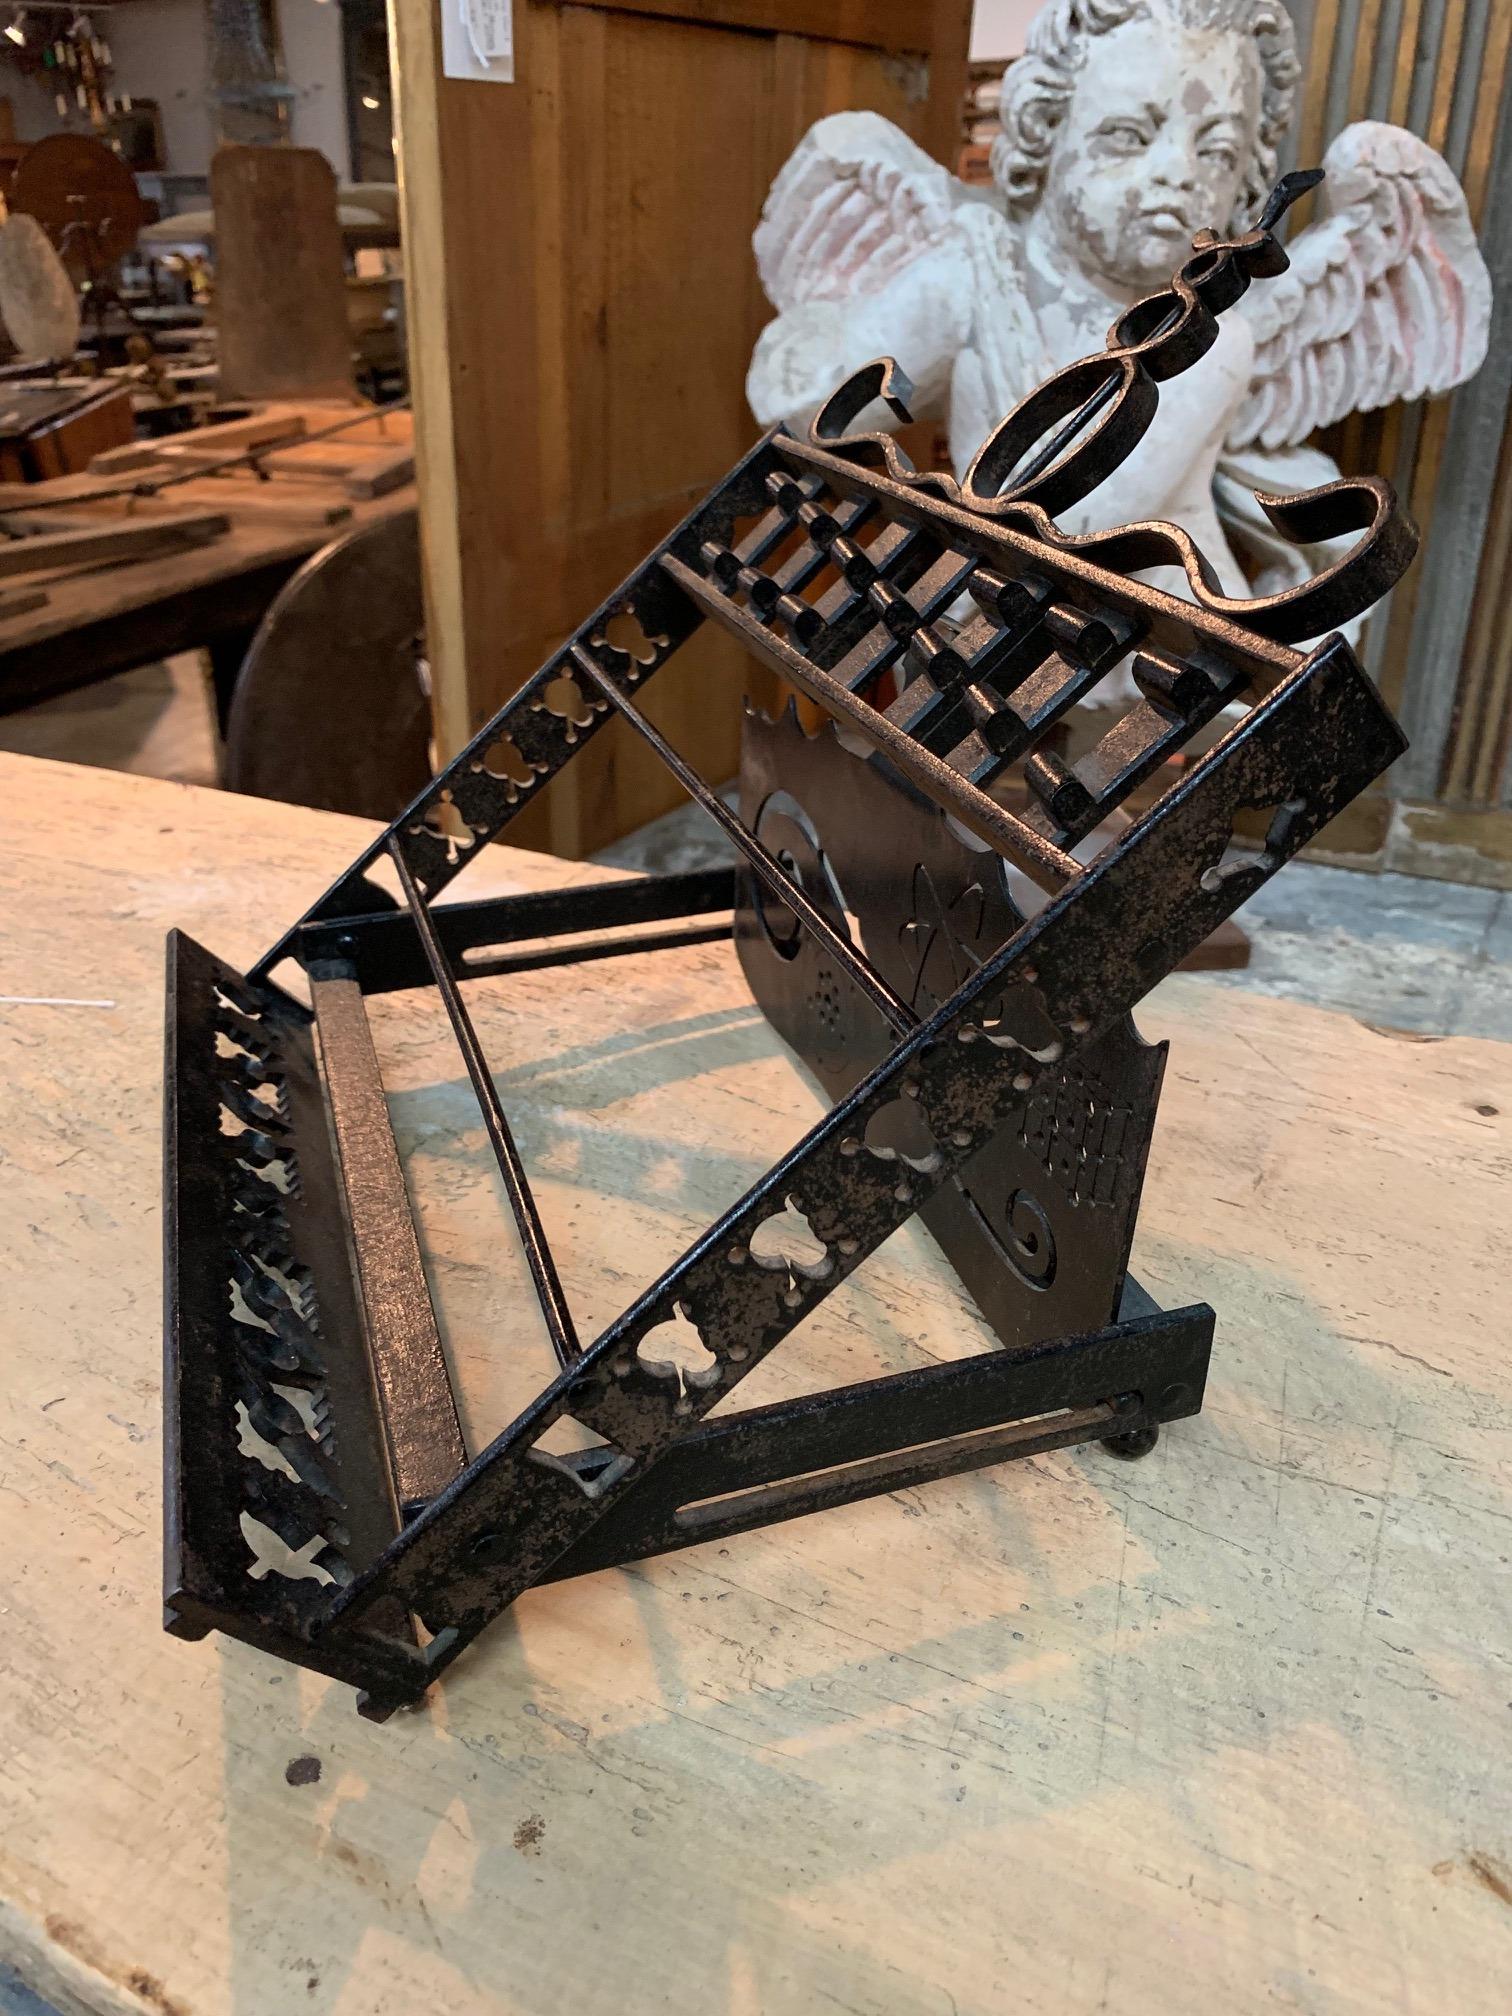 A very handsome French early 20th century Arte Populaire book rest or bible stand. Beautifully crafted from painted iron with medical, cosmos and skull and cross bone motifs. Also wonderful to display a painting from.